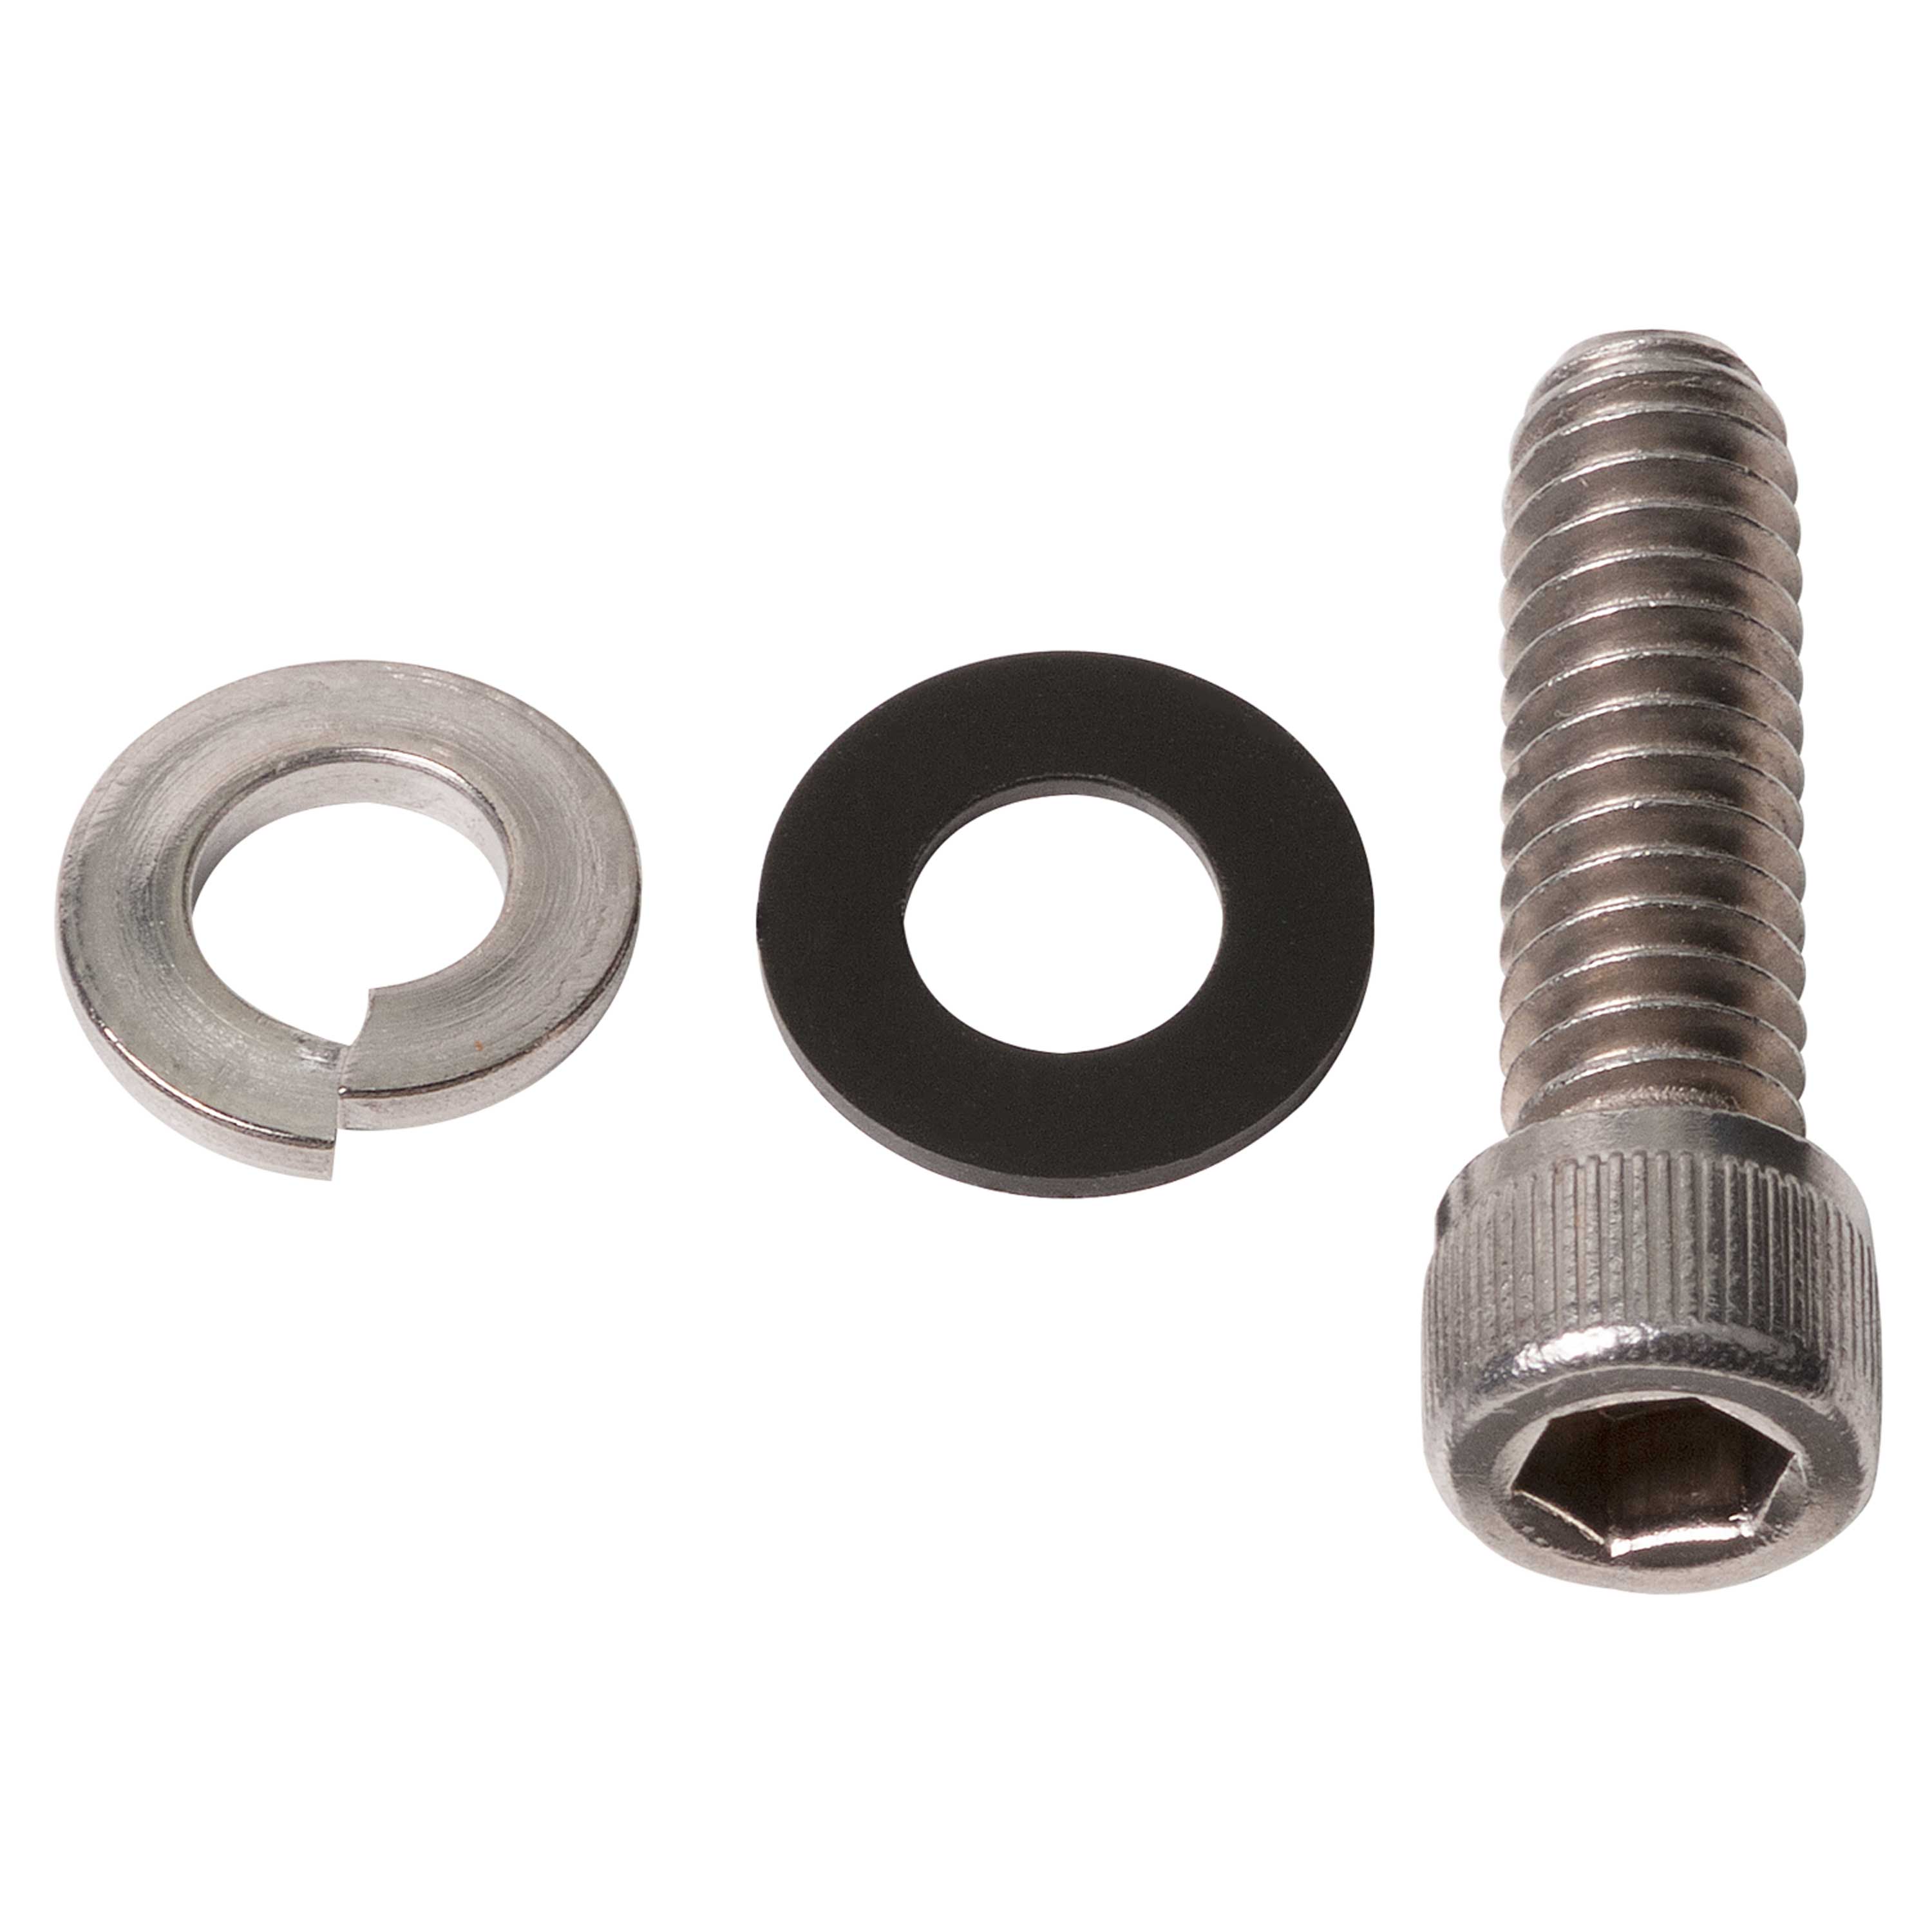 Hardware Set for Quick Release Handle 9531.1 / 9531.2